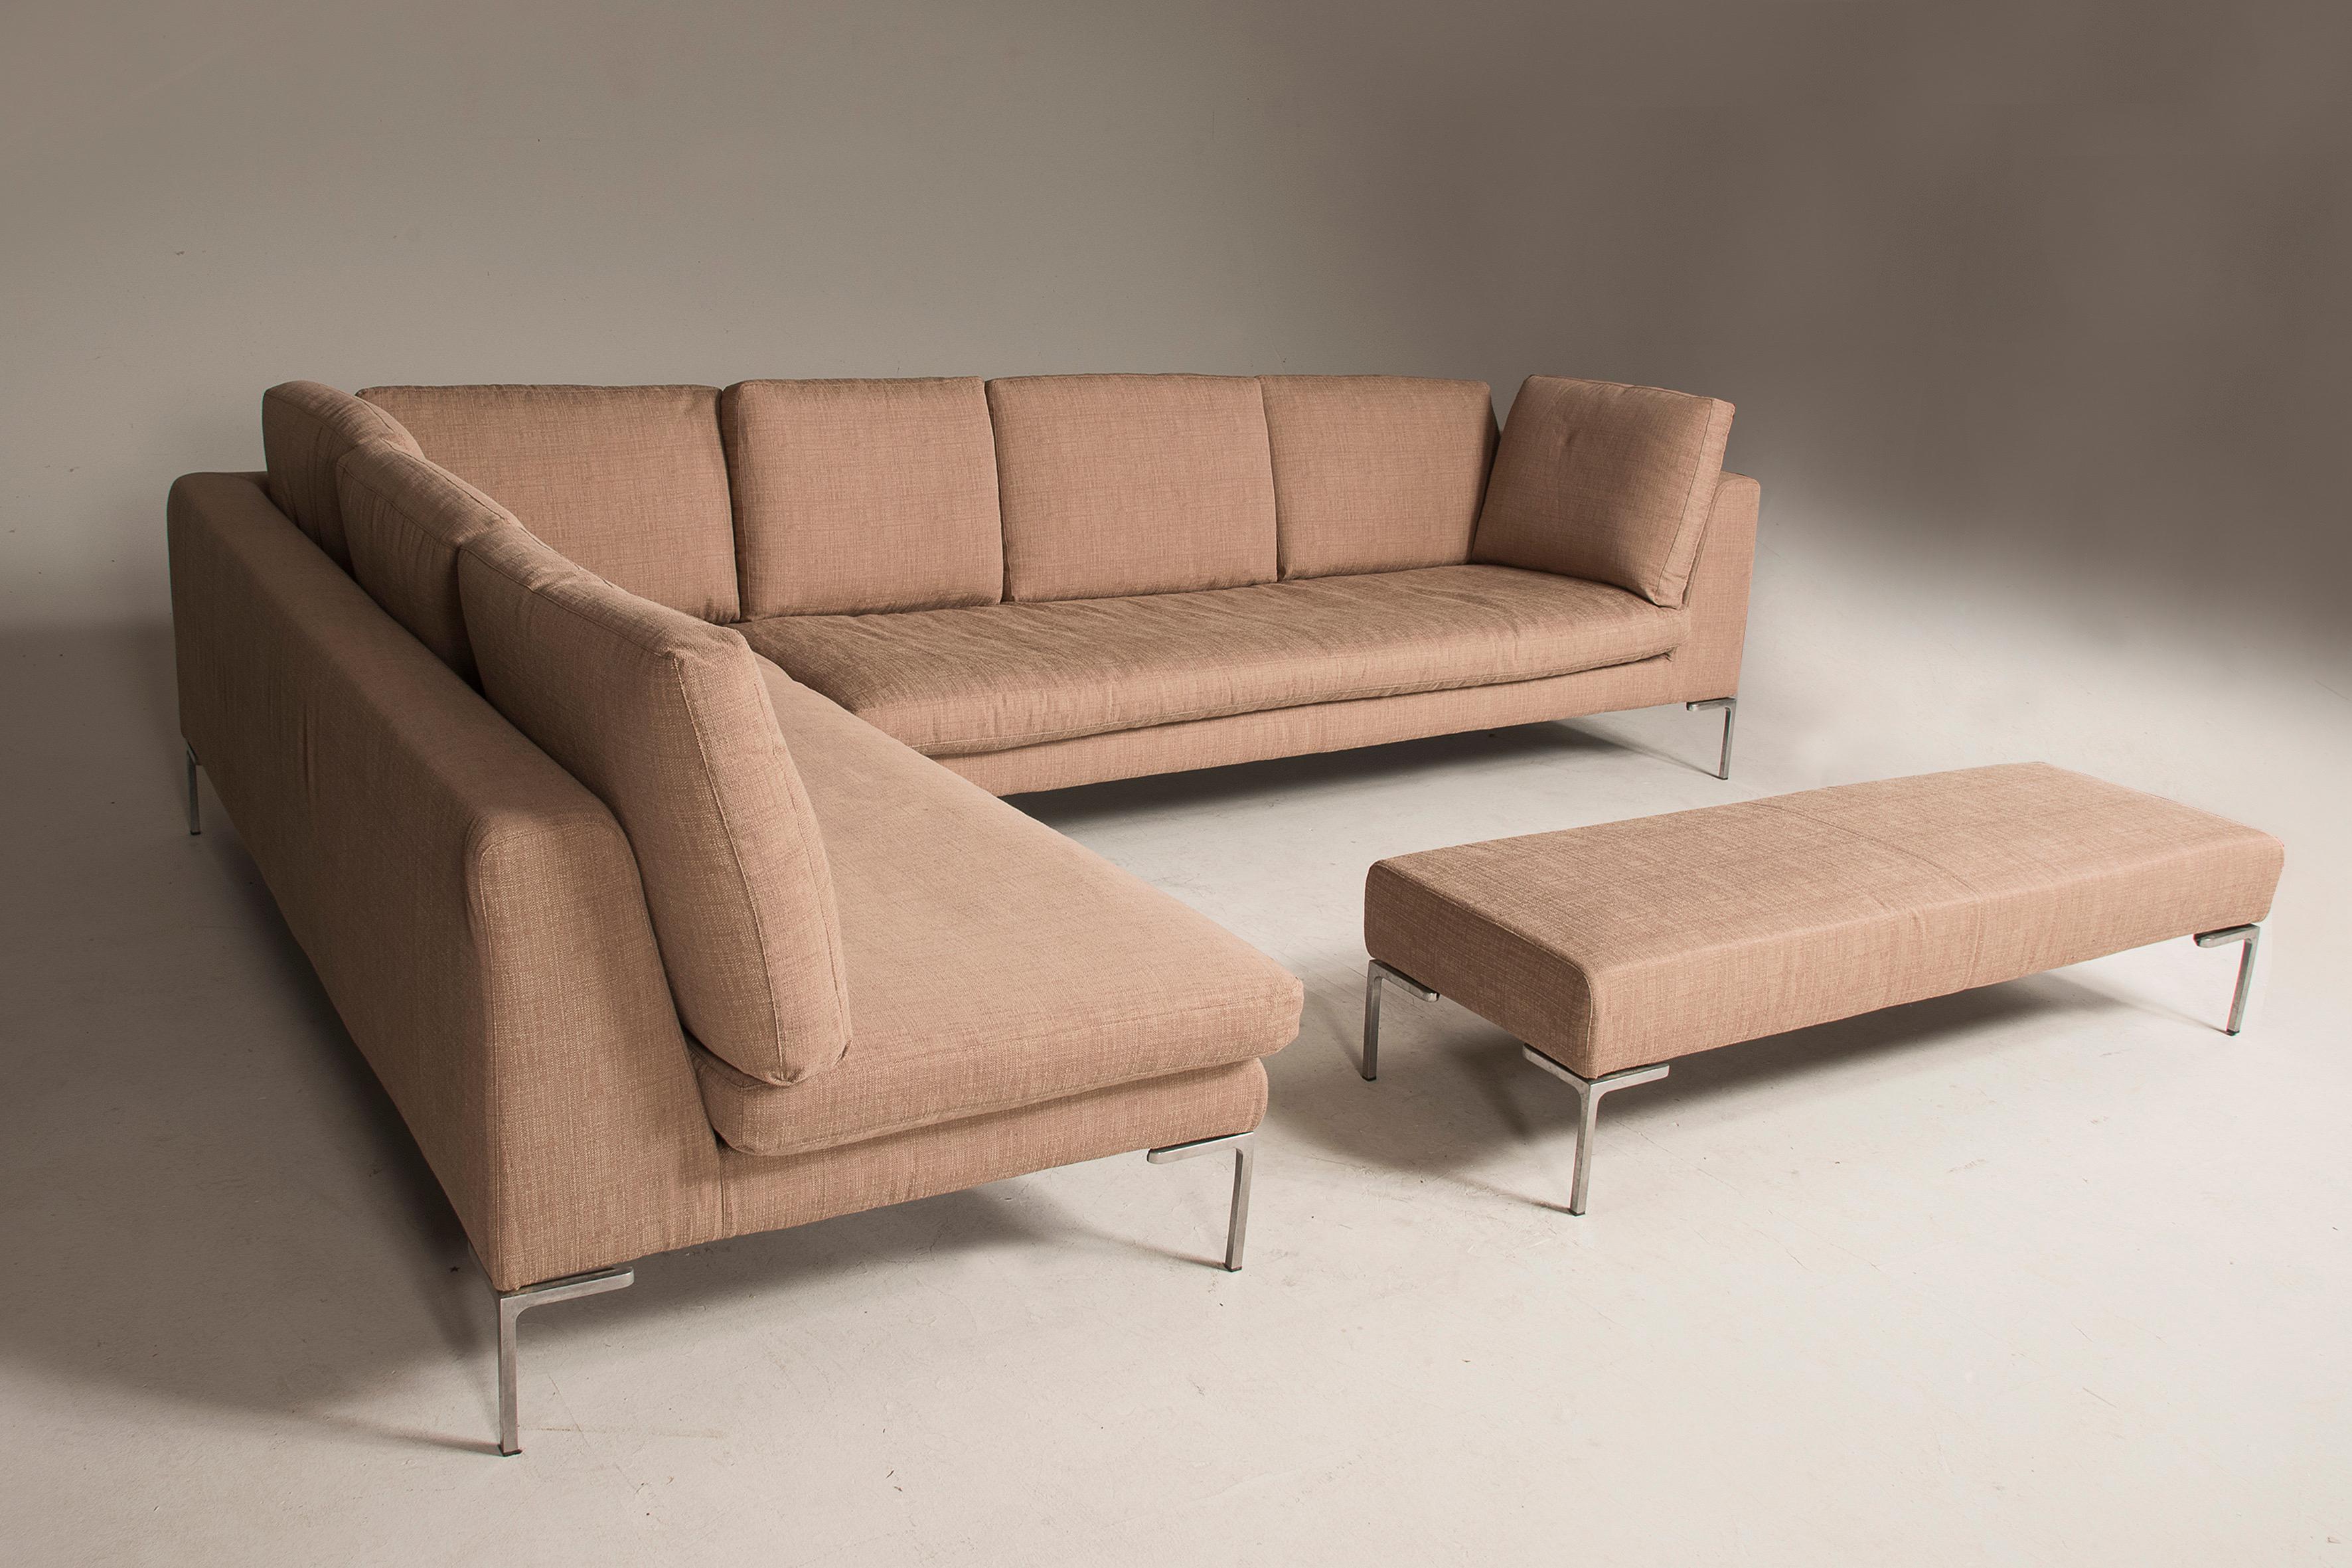 European Charles Model by Antonio Citterio for B&B Italia Beige Color Sofà and Bench Set